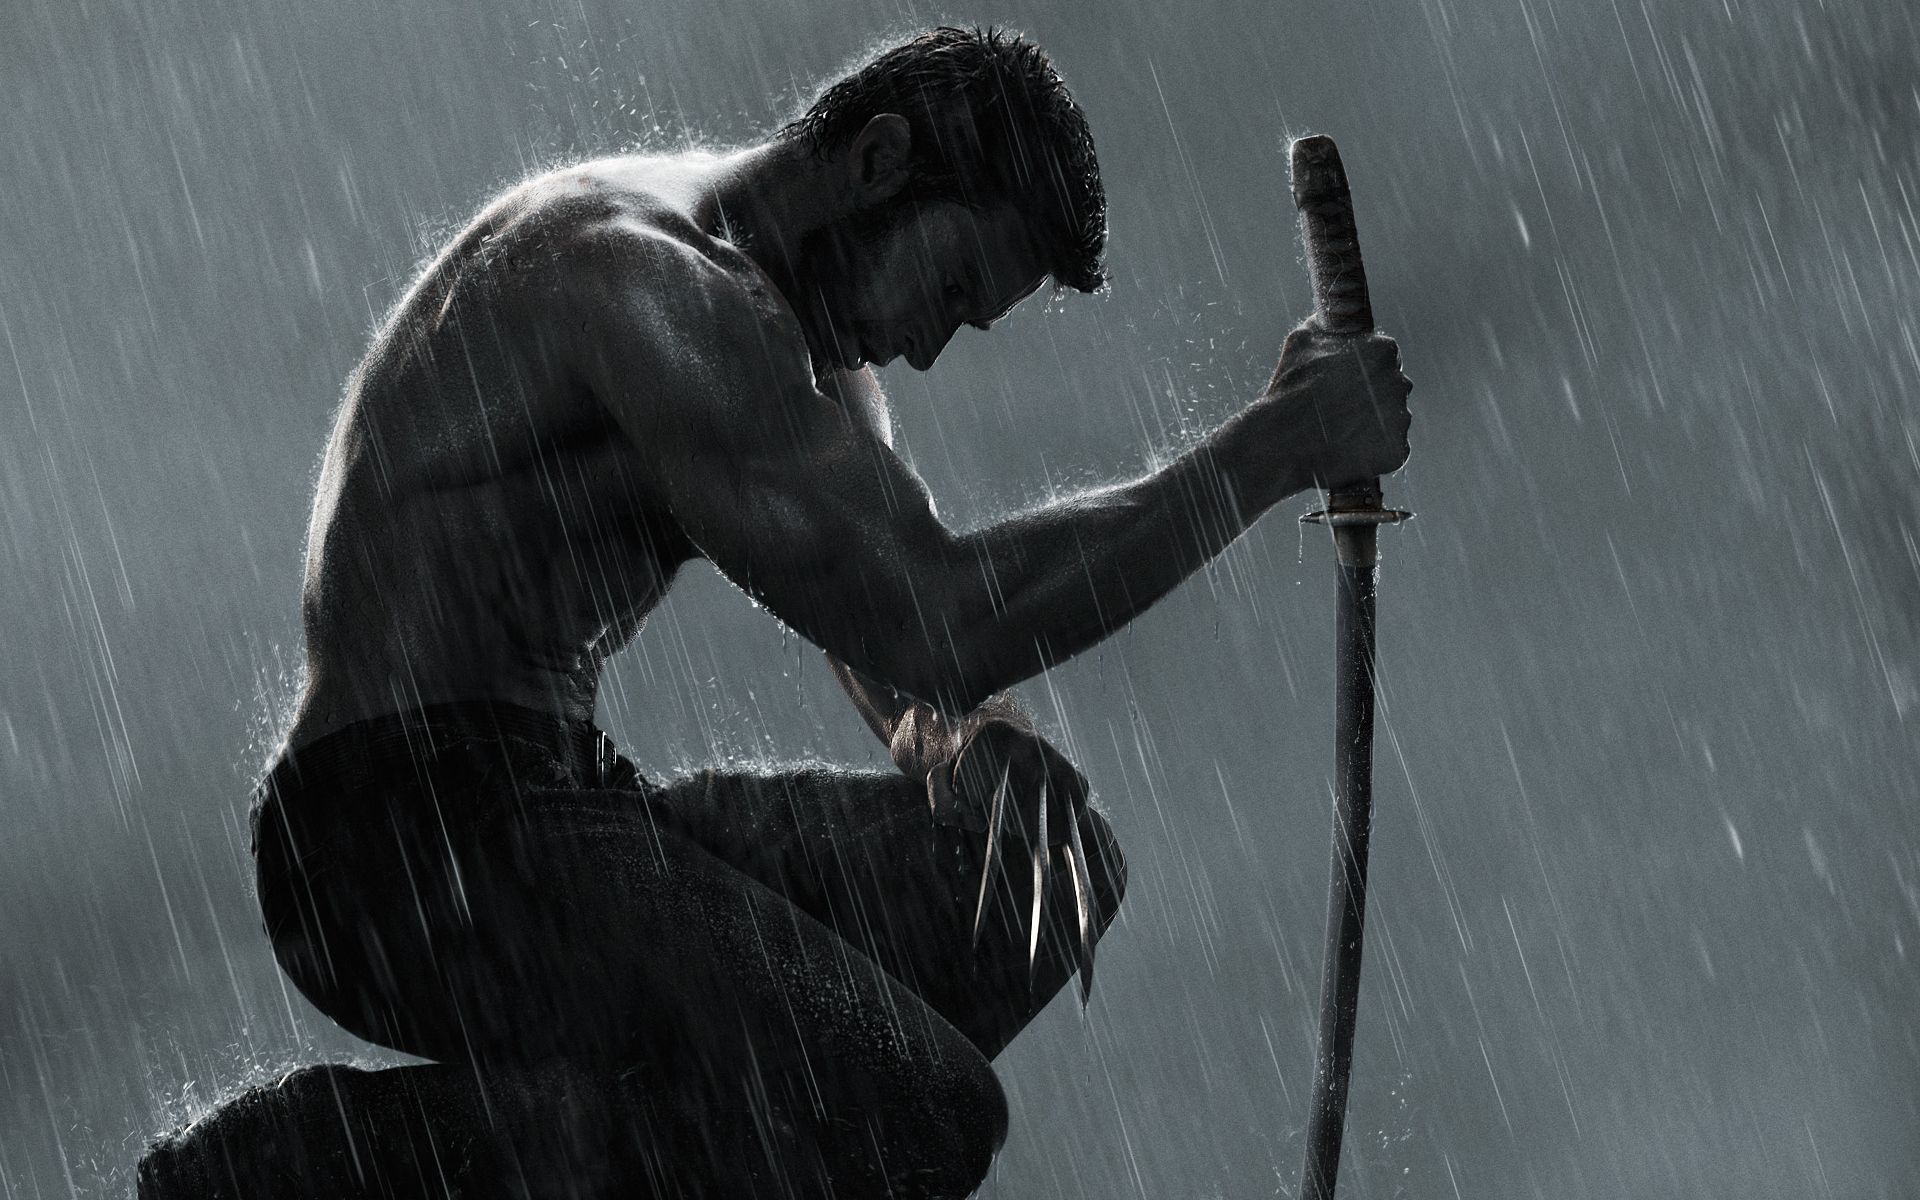 Hands, Rain, Guy, Wolverine immortal wallpapers and images ...